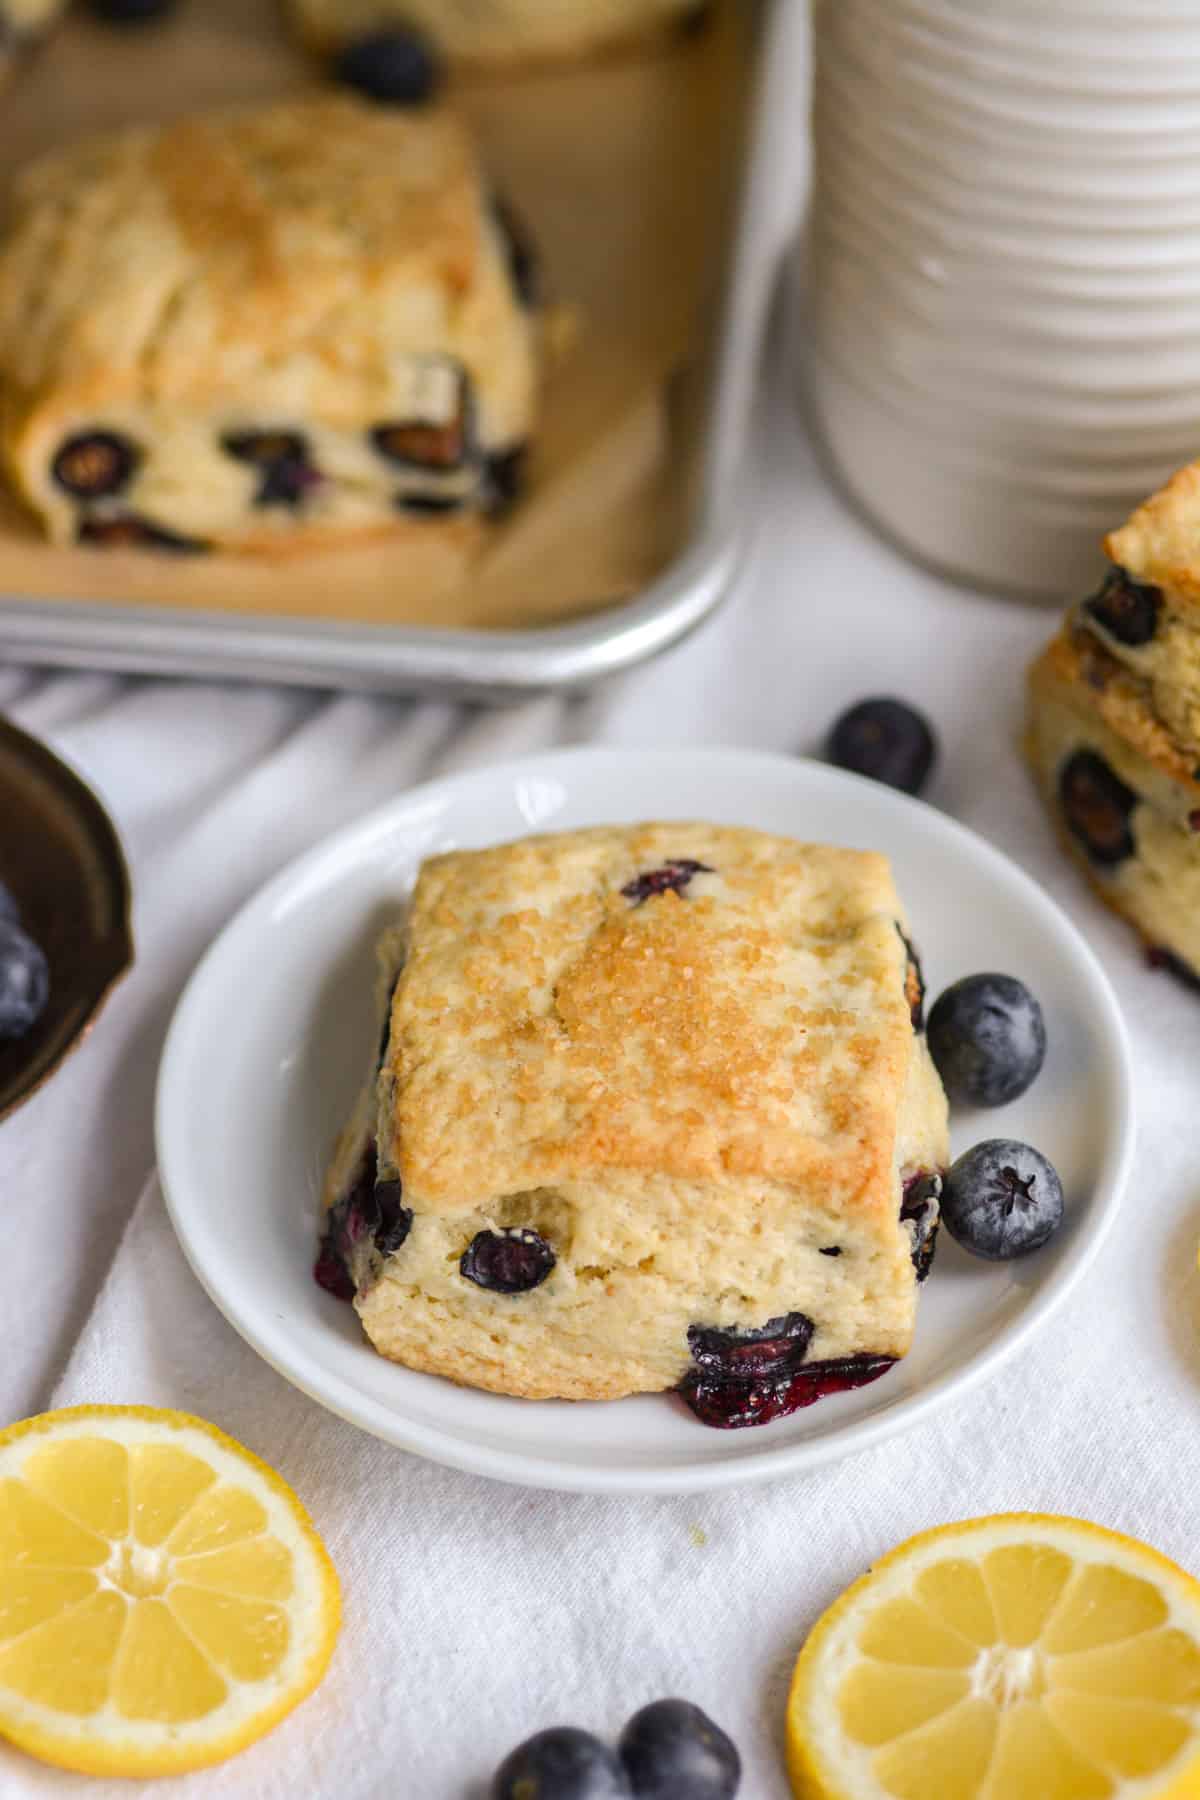 Vegan Blueberry scone on a small plate with lemon slices and blueberries in the scene.